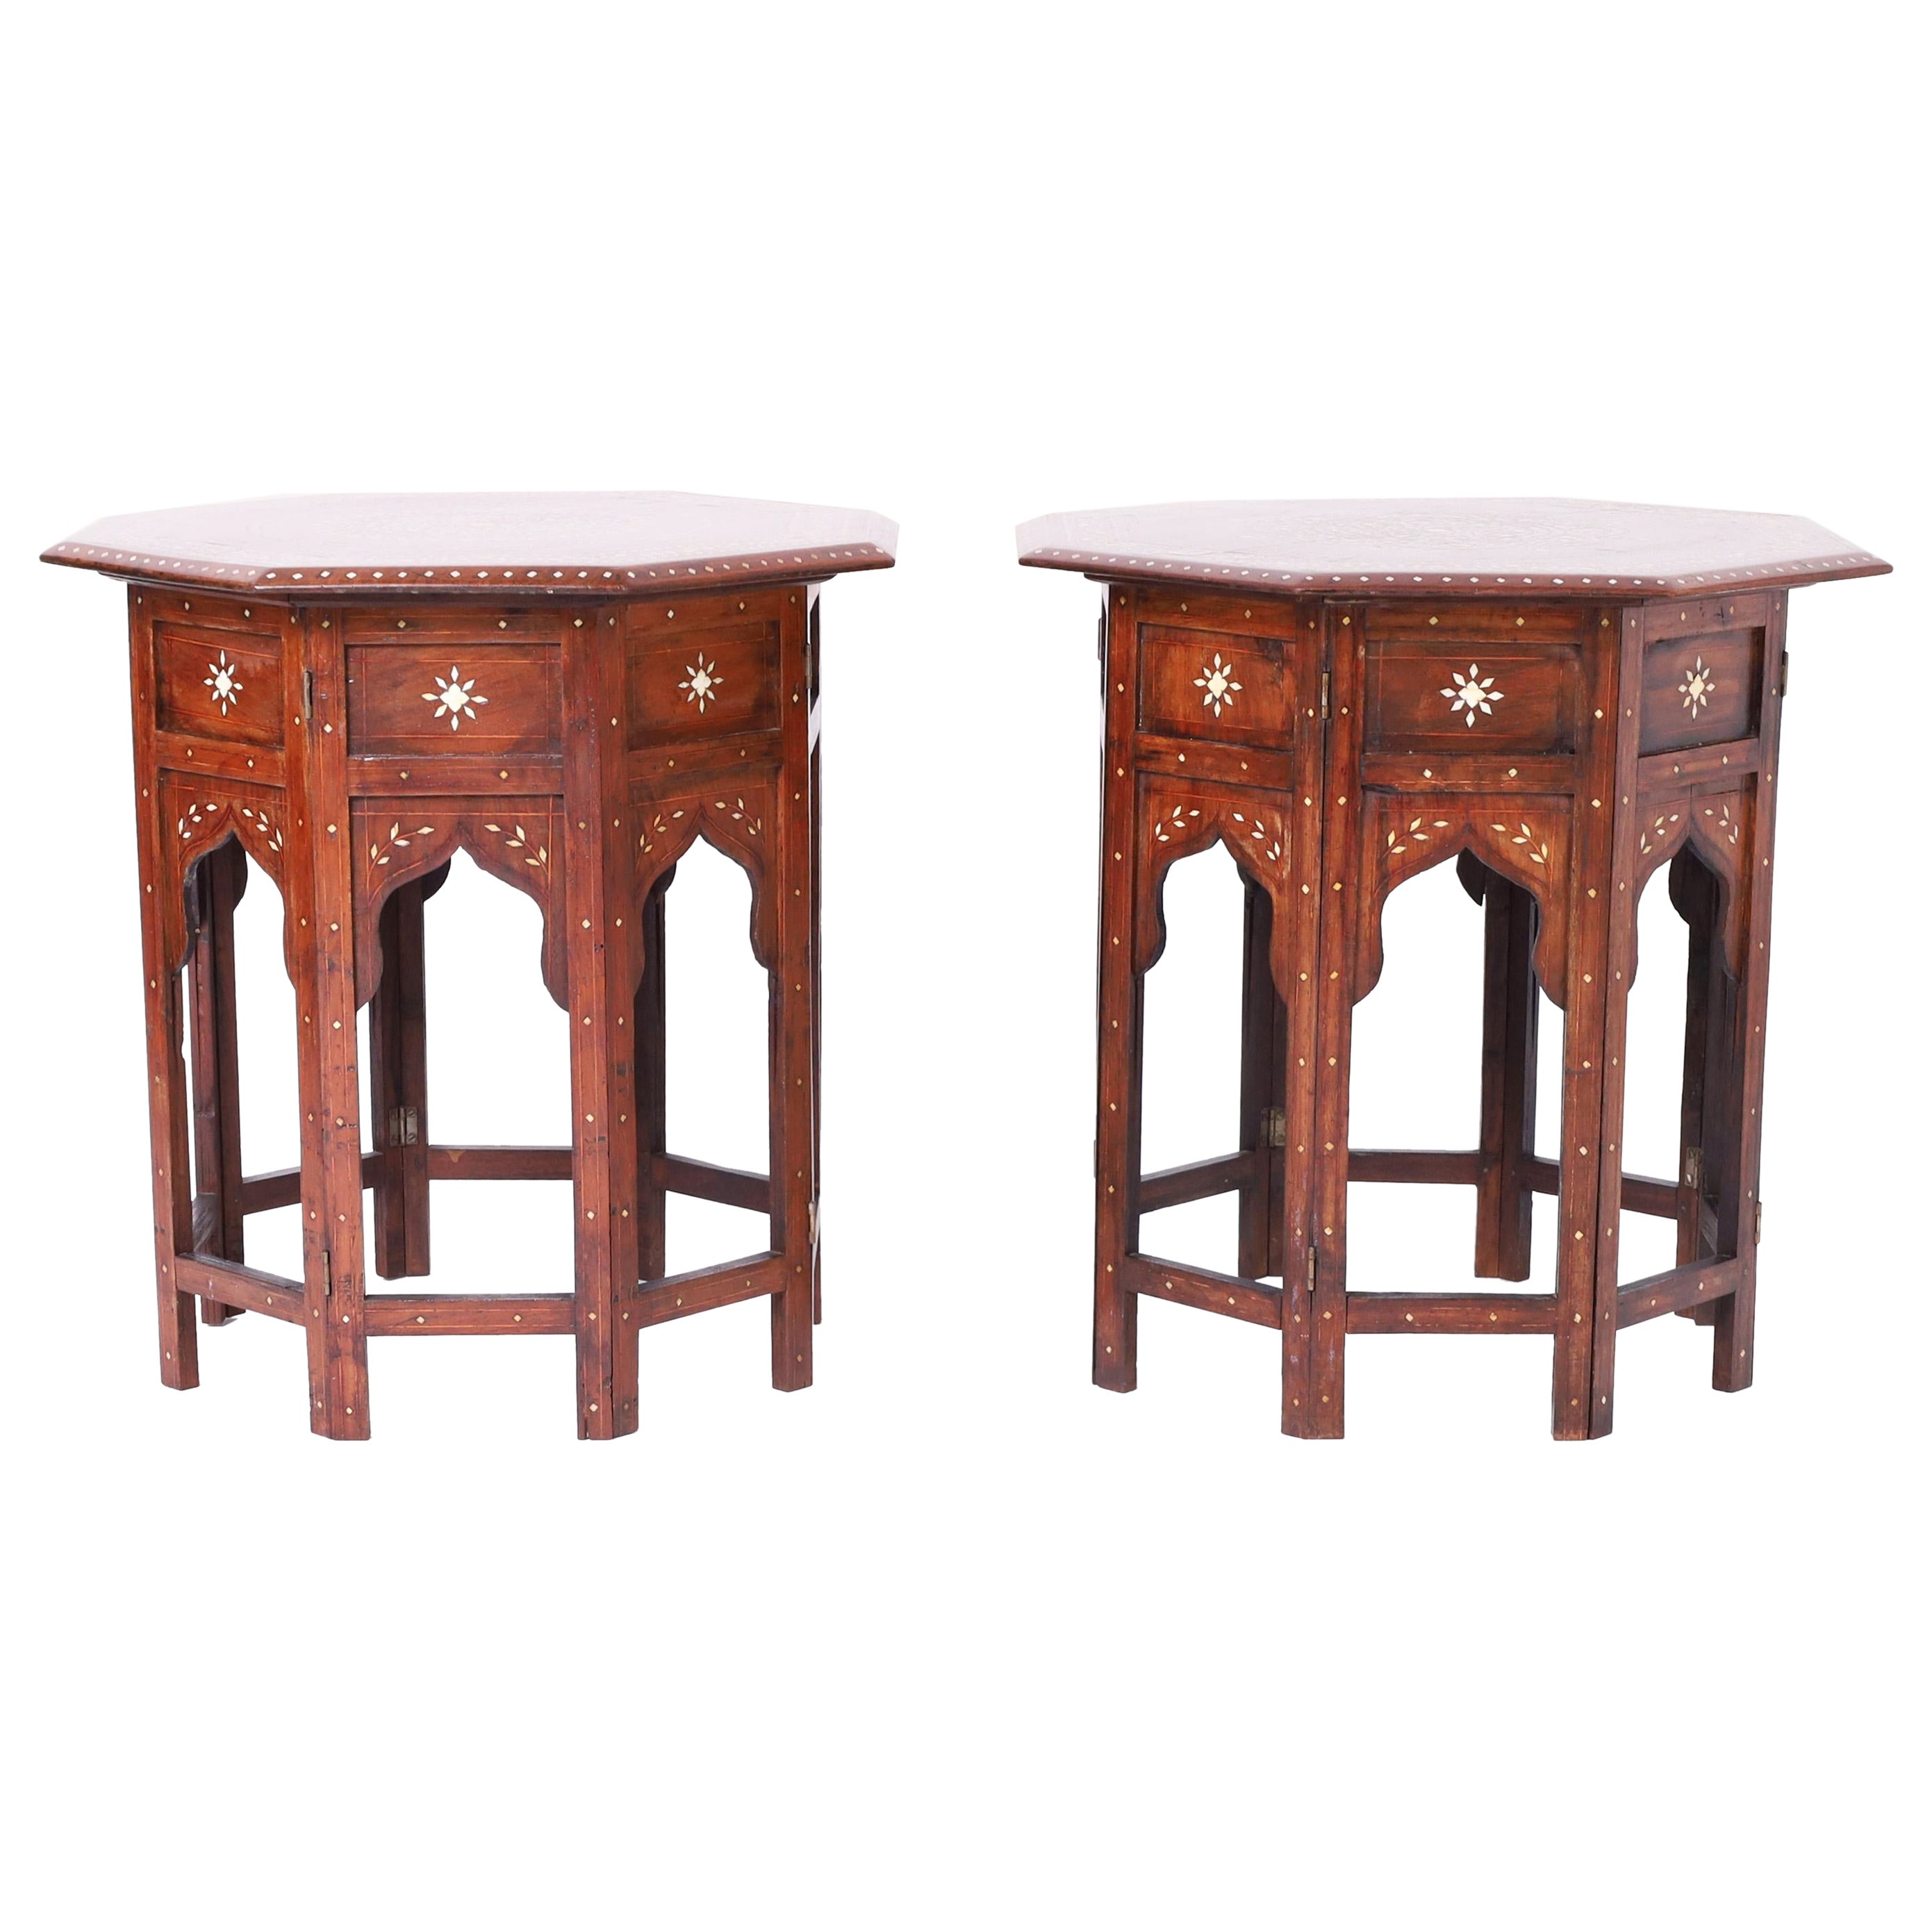 Pair of Antique Moroccan Inlaid Stands or Tables